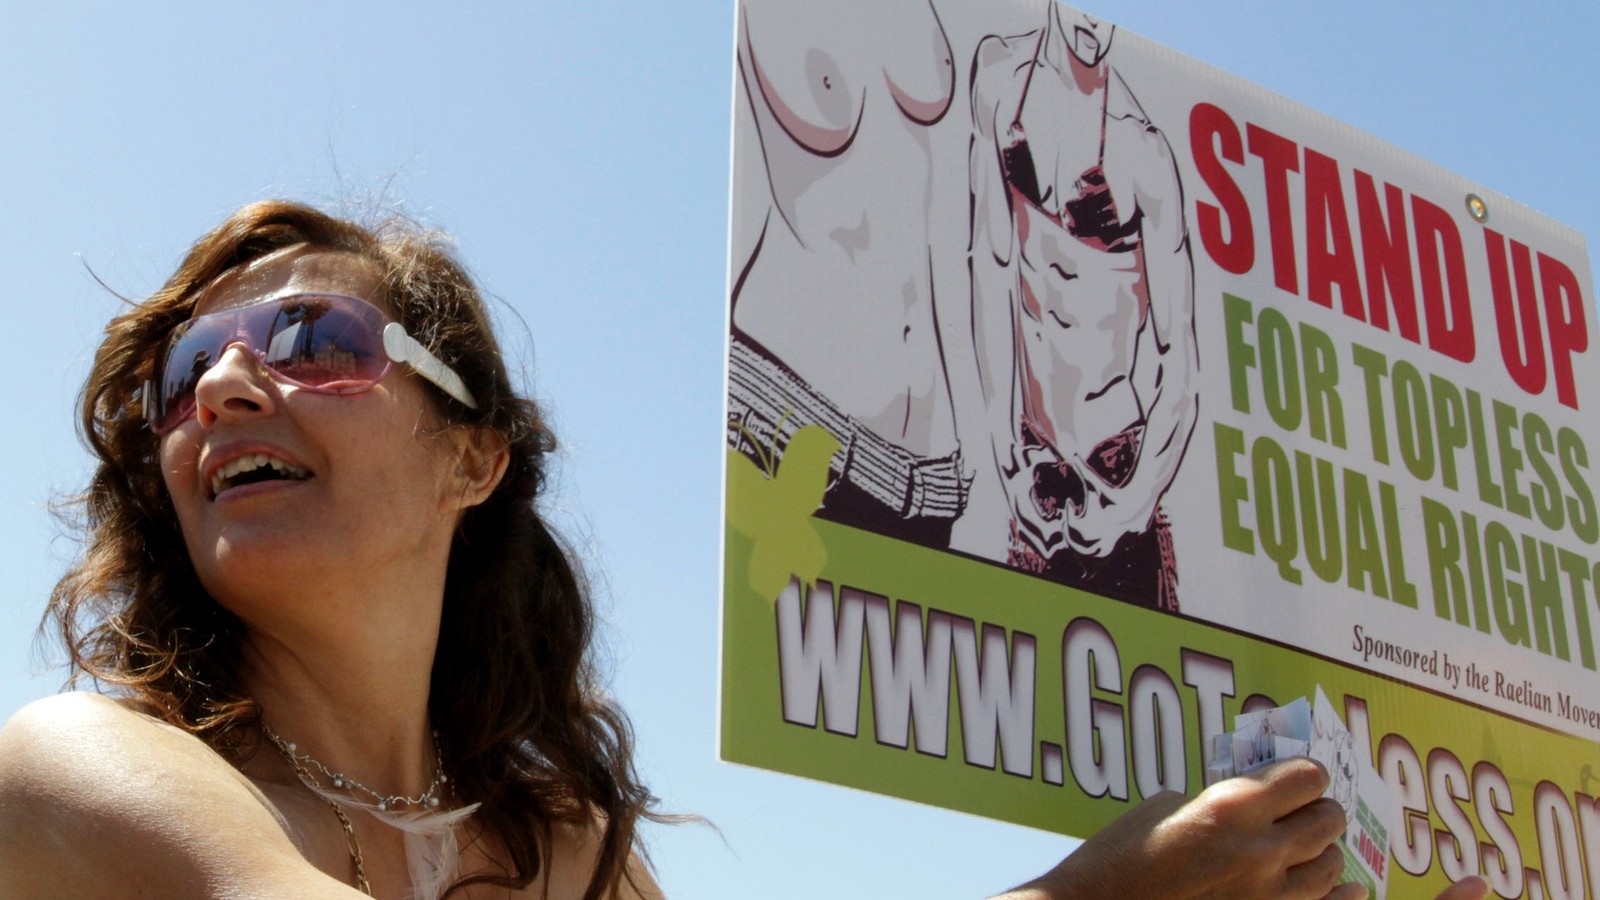 Can naked breasts make important political points?